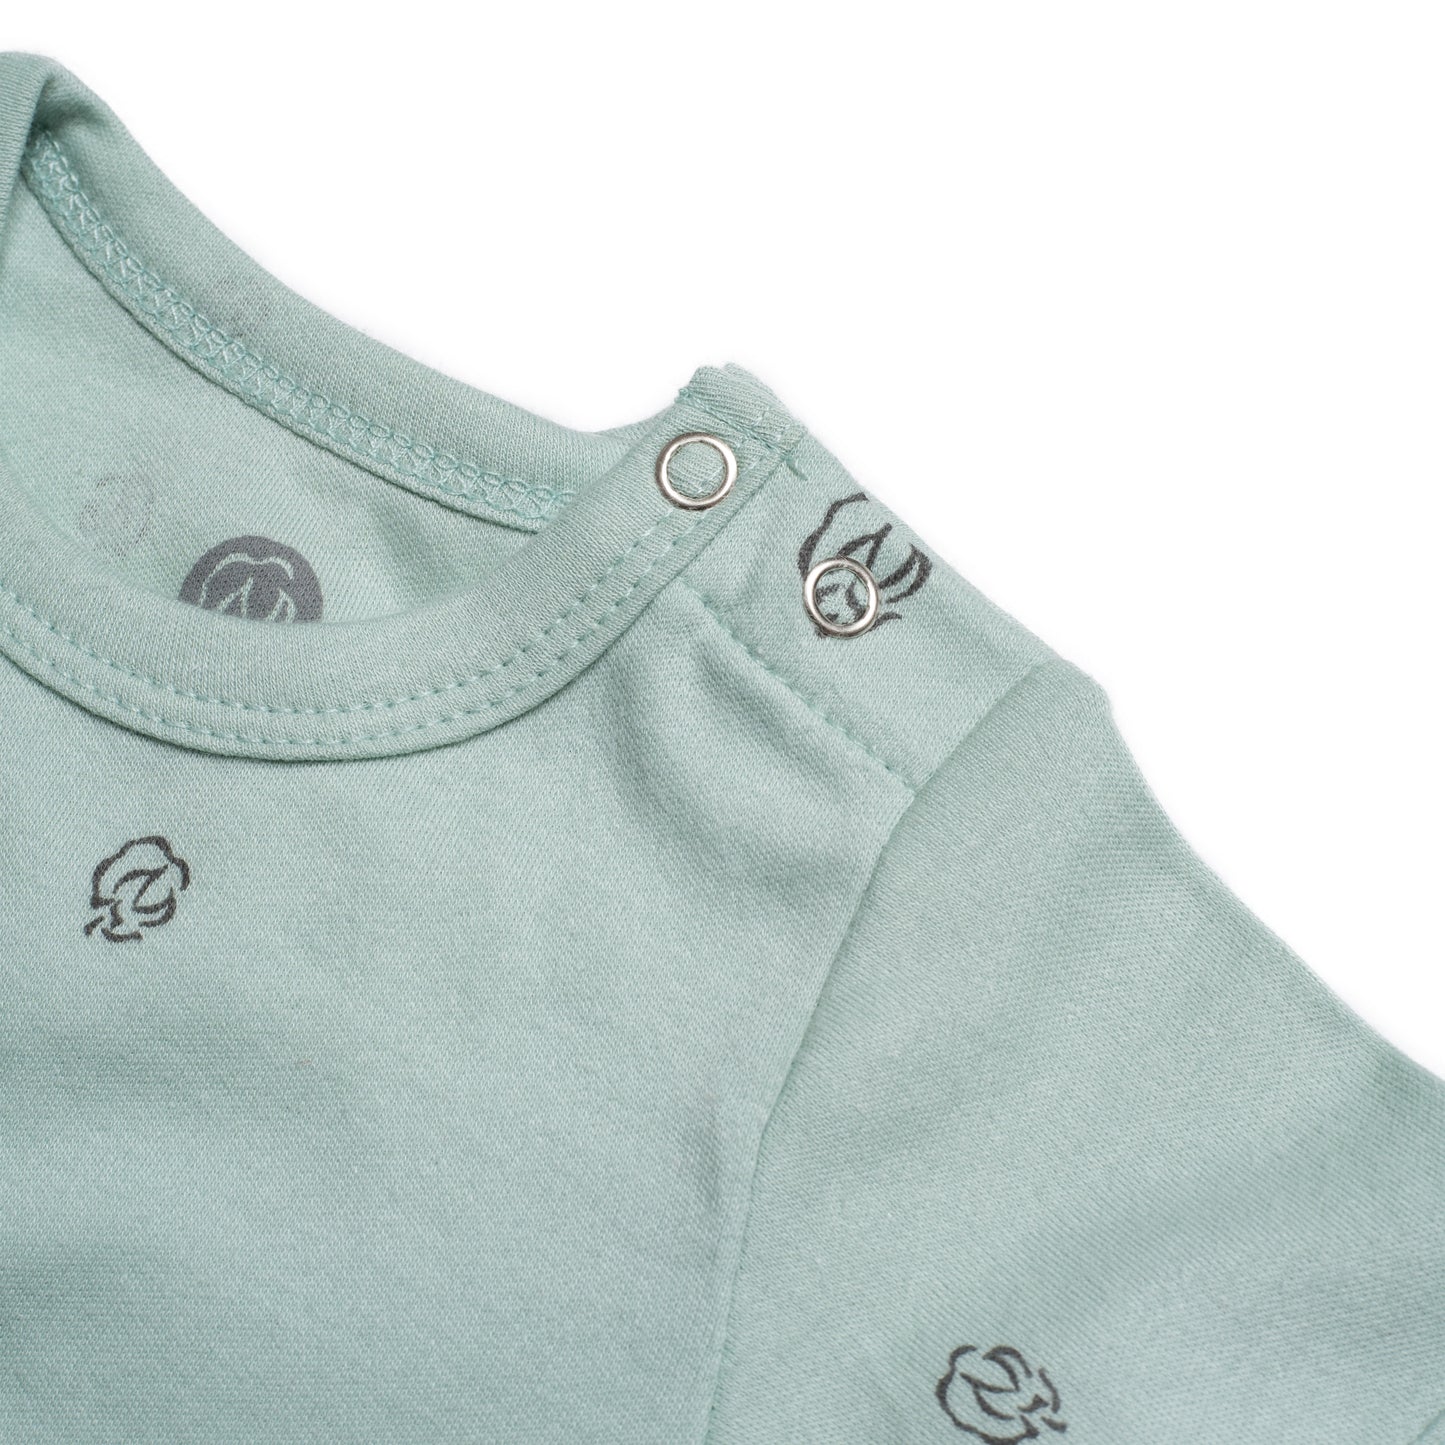 Short sleeve baby bodysuit - Sage with Cotton Bloom